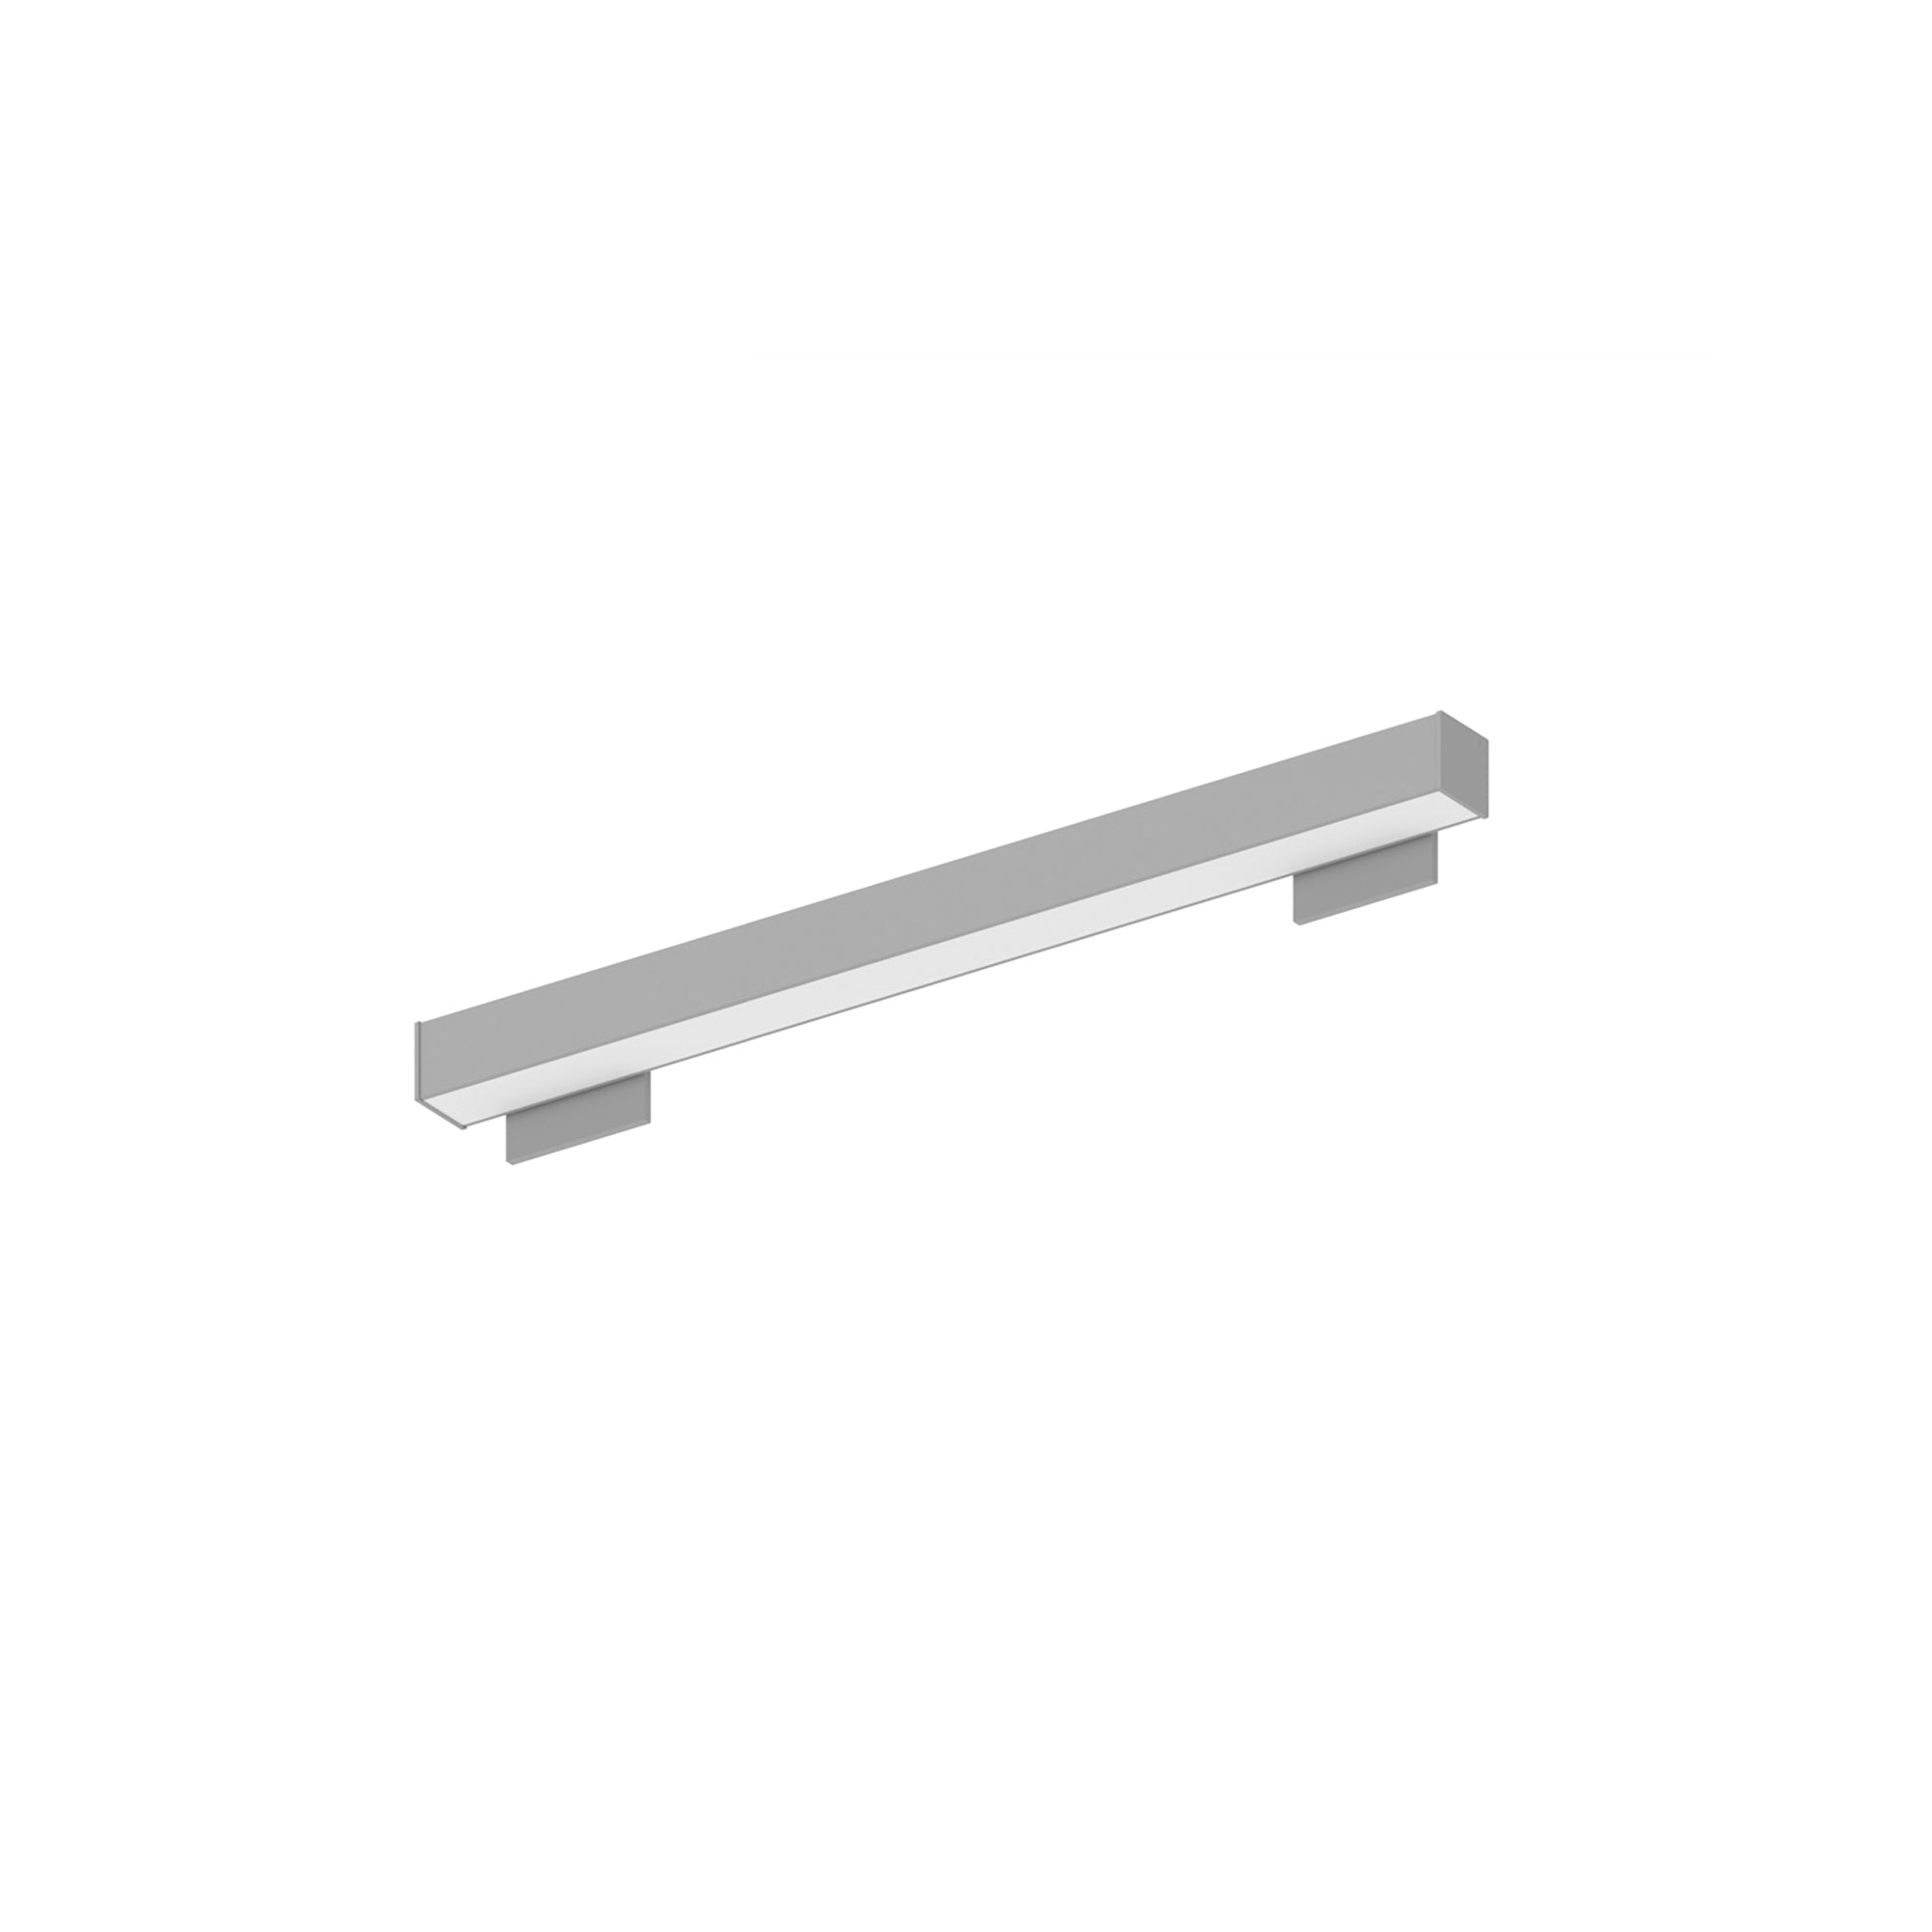 Nora Lighting NWLIN-21030A/L4-R4 - Linear - 2' L-Line LED Wall Mount Linear, 2100lm / 3000K, 4 Inchx4 Inch Left Plate & 4 Inchx4 Inch Right Plate, Aluminum Finish